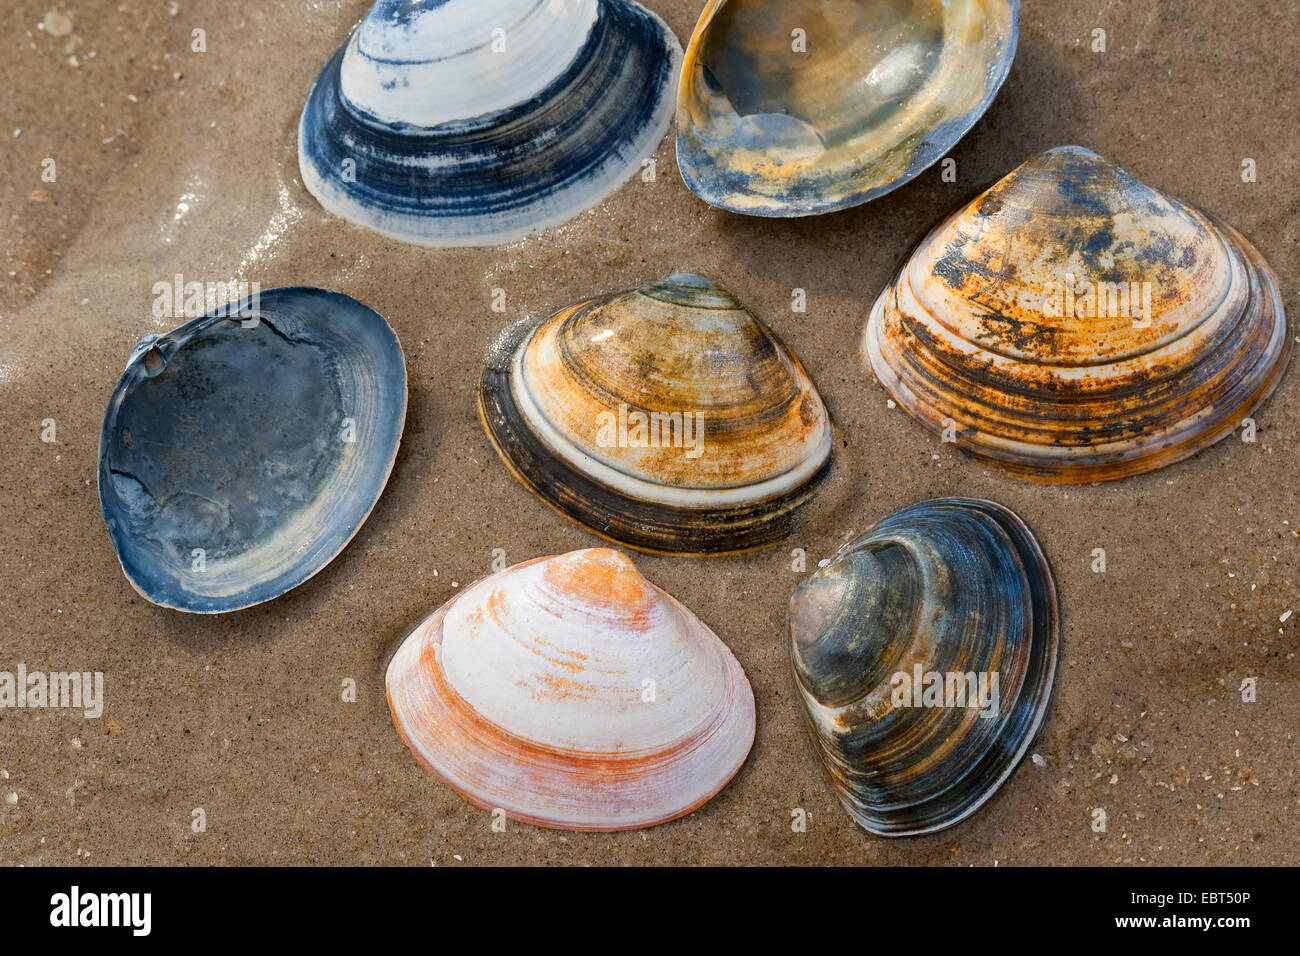 Thick surfclam, Tthick trough shell (Spisula solida), shells on the beach, Germany Stock Photo